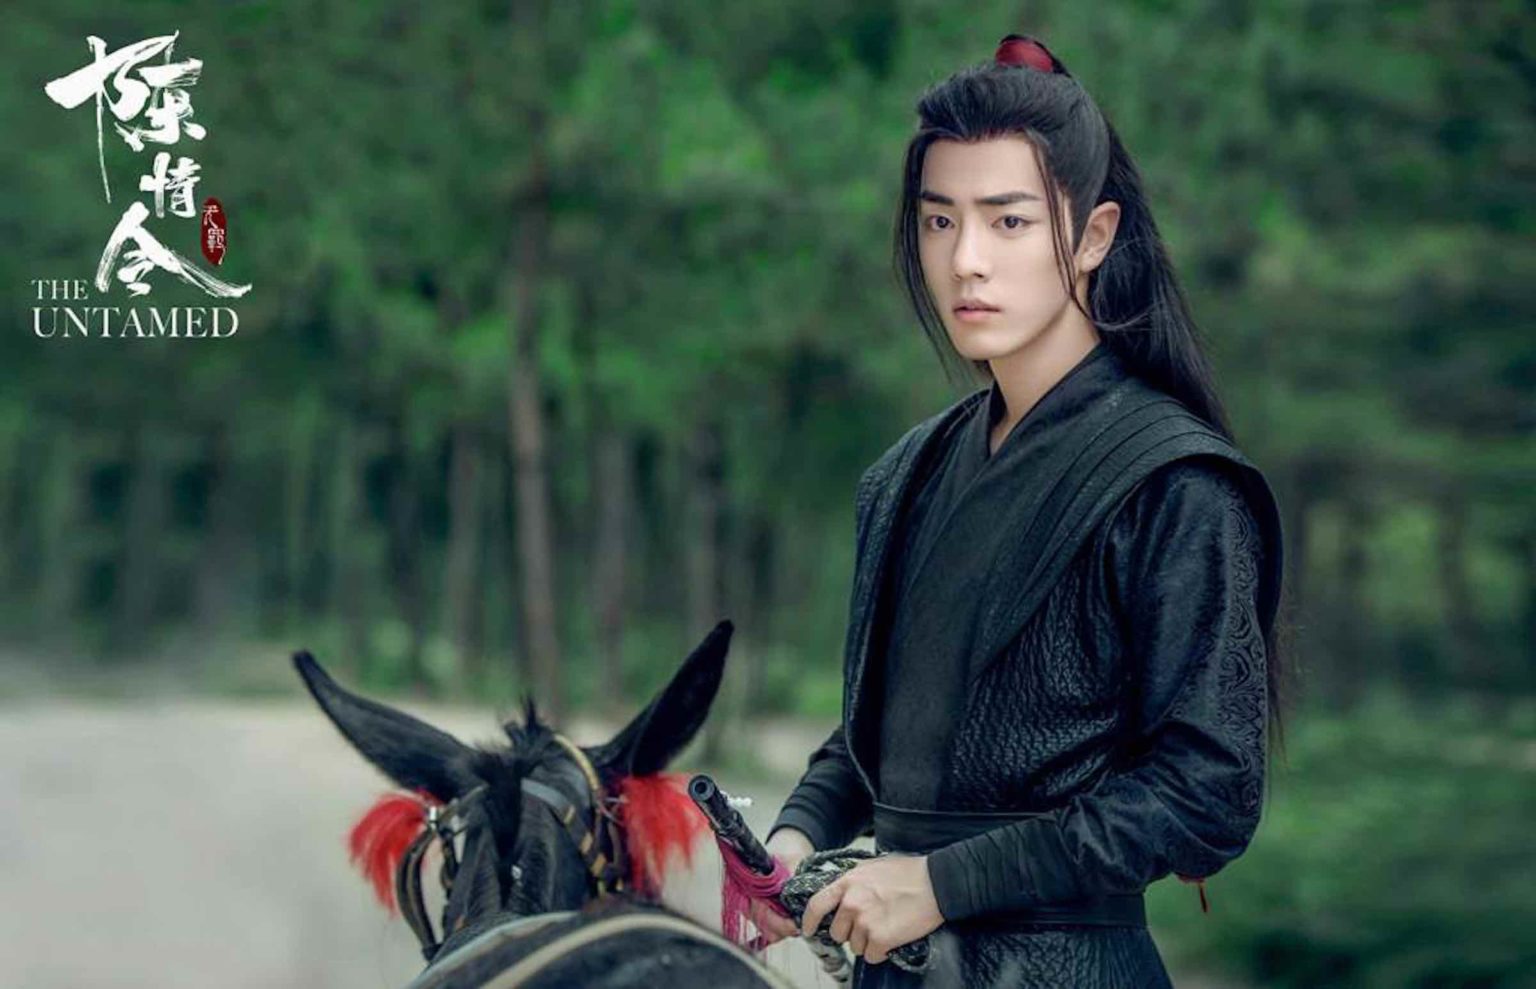 In case you’ve been living under a rock & don’t know yet, 'The Untamed' is a Chinese BL drama. Here's our fave moments of adolescent Wei Wuxian.